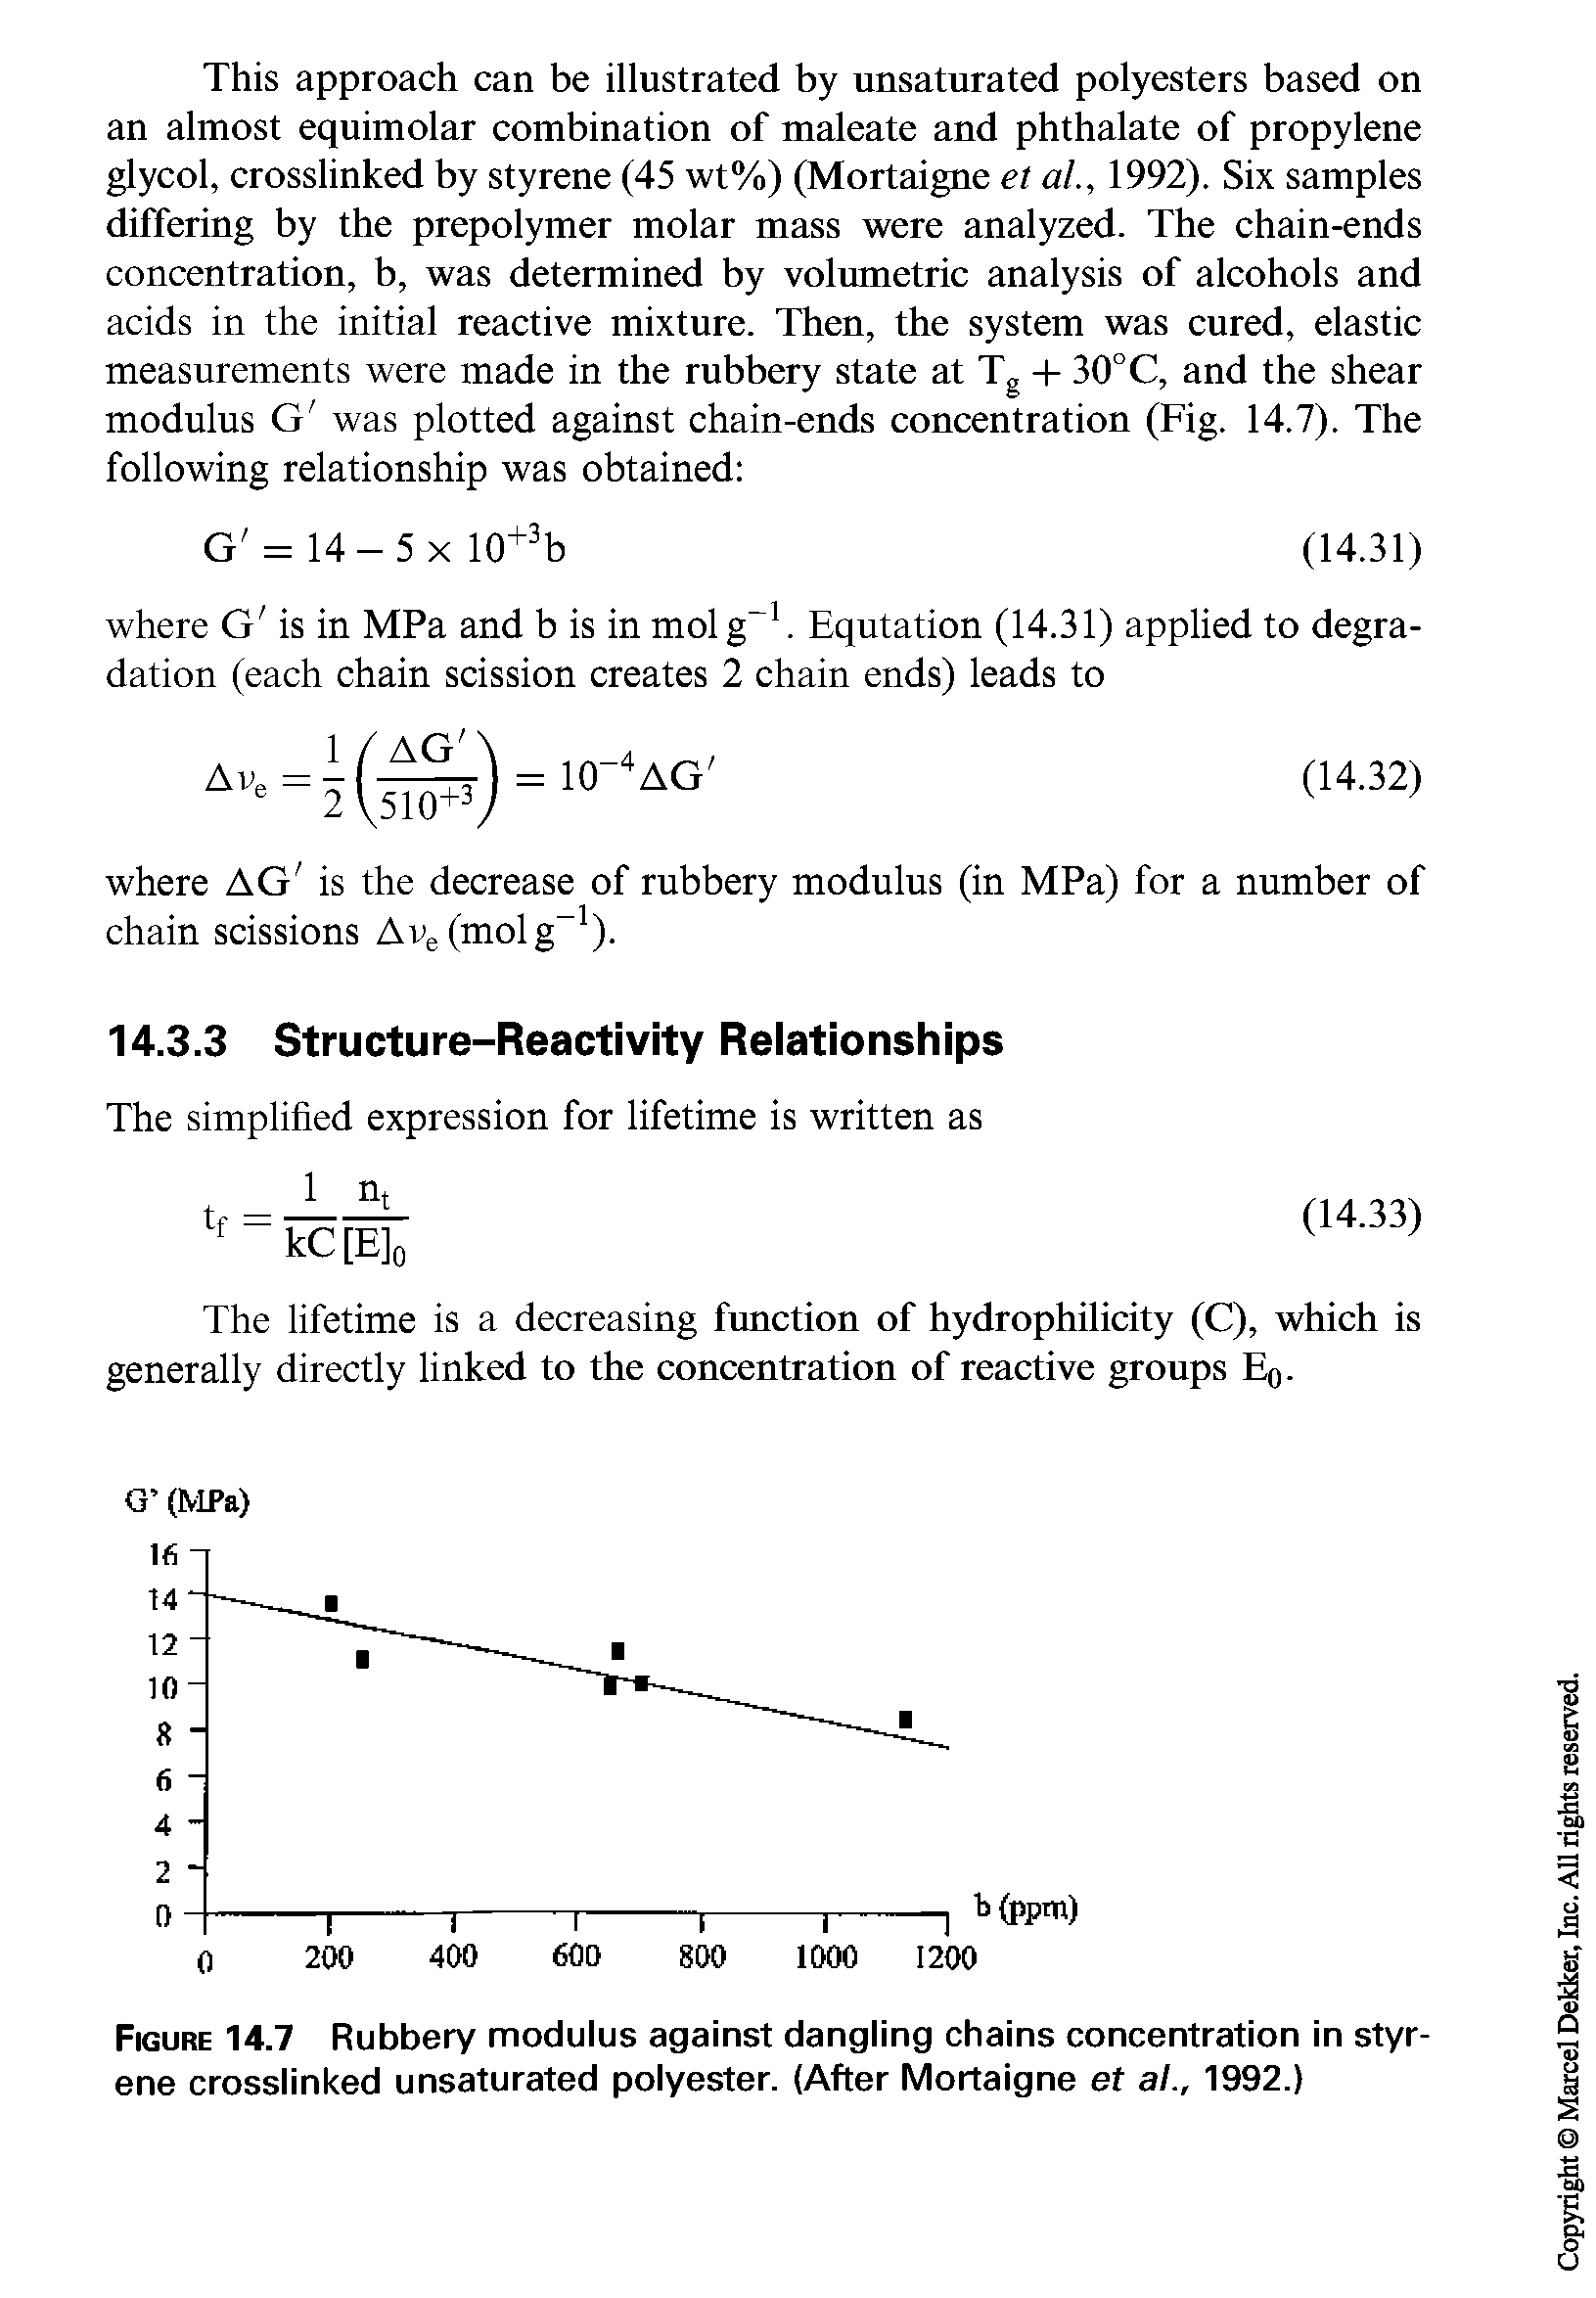 Figure 14.7 Rubbery modulus against dangling chains concentration in styrene crosslinked unsaturated polyester. (After Mortaigne et a/., 1992.)...